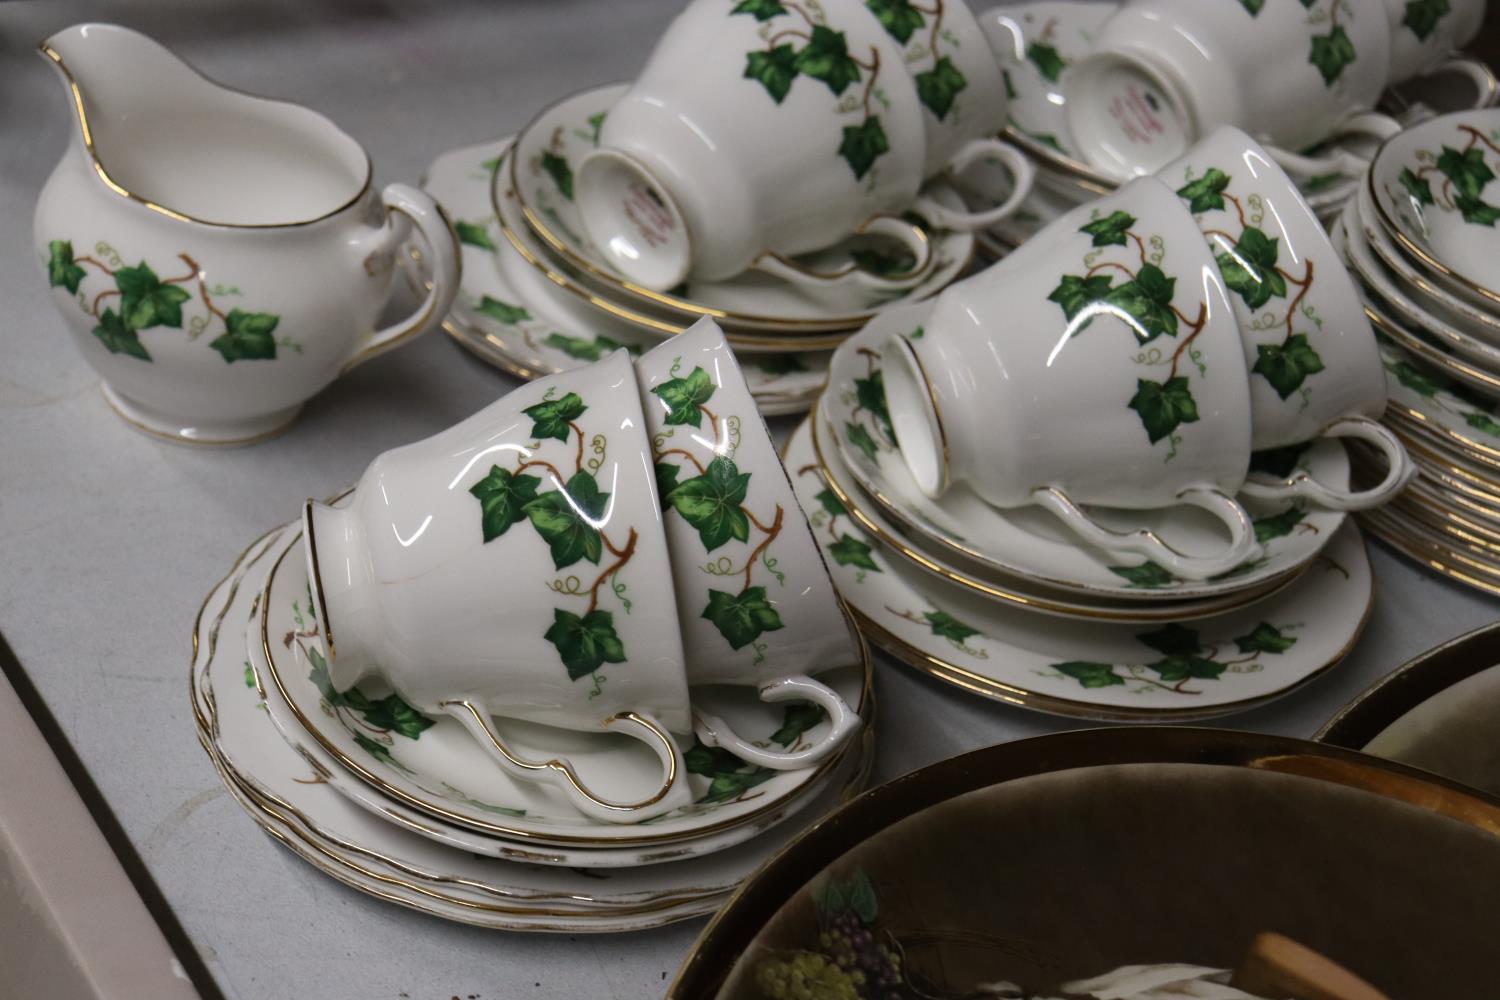 A COLCLOUGH 'IVY LEAF' PART TEASET TO INCLUDE CAKE PLATES, A CREAM JUG, CUPS, SAUCERS AND SIDE - Image 6 of 6